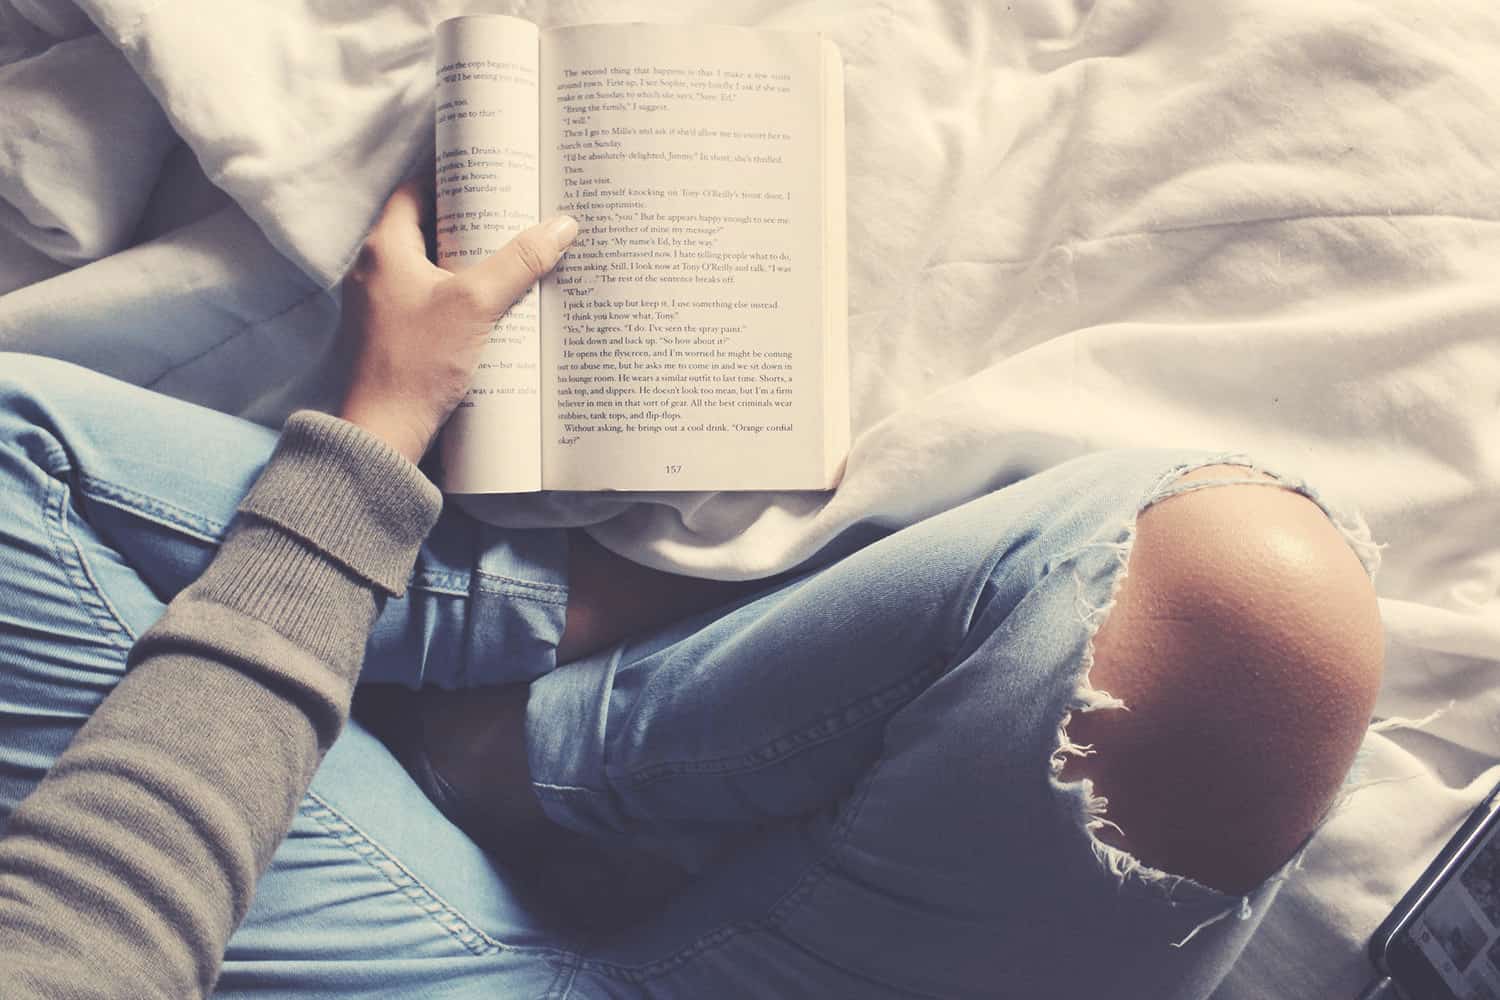 Love this article about the benefits of reading with science-backed reasons 'getting lost in a good book' is good for you